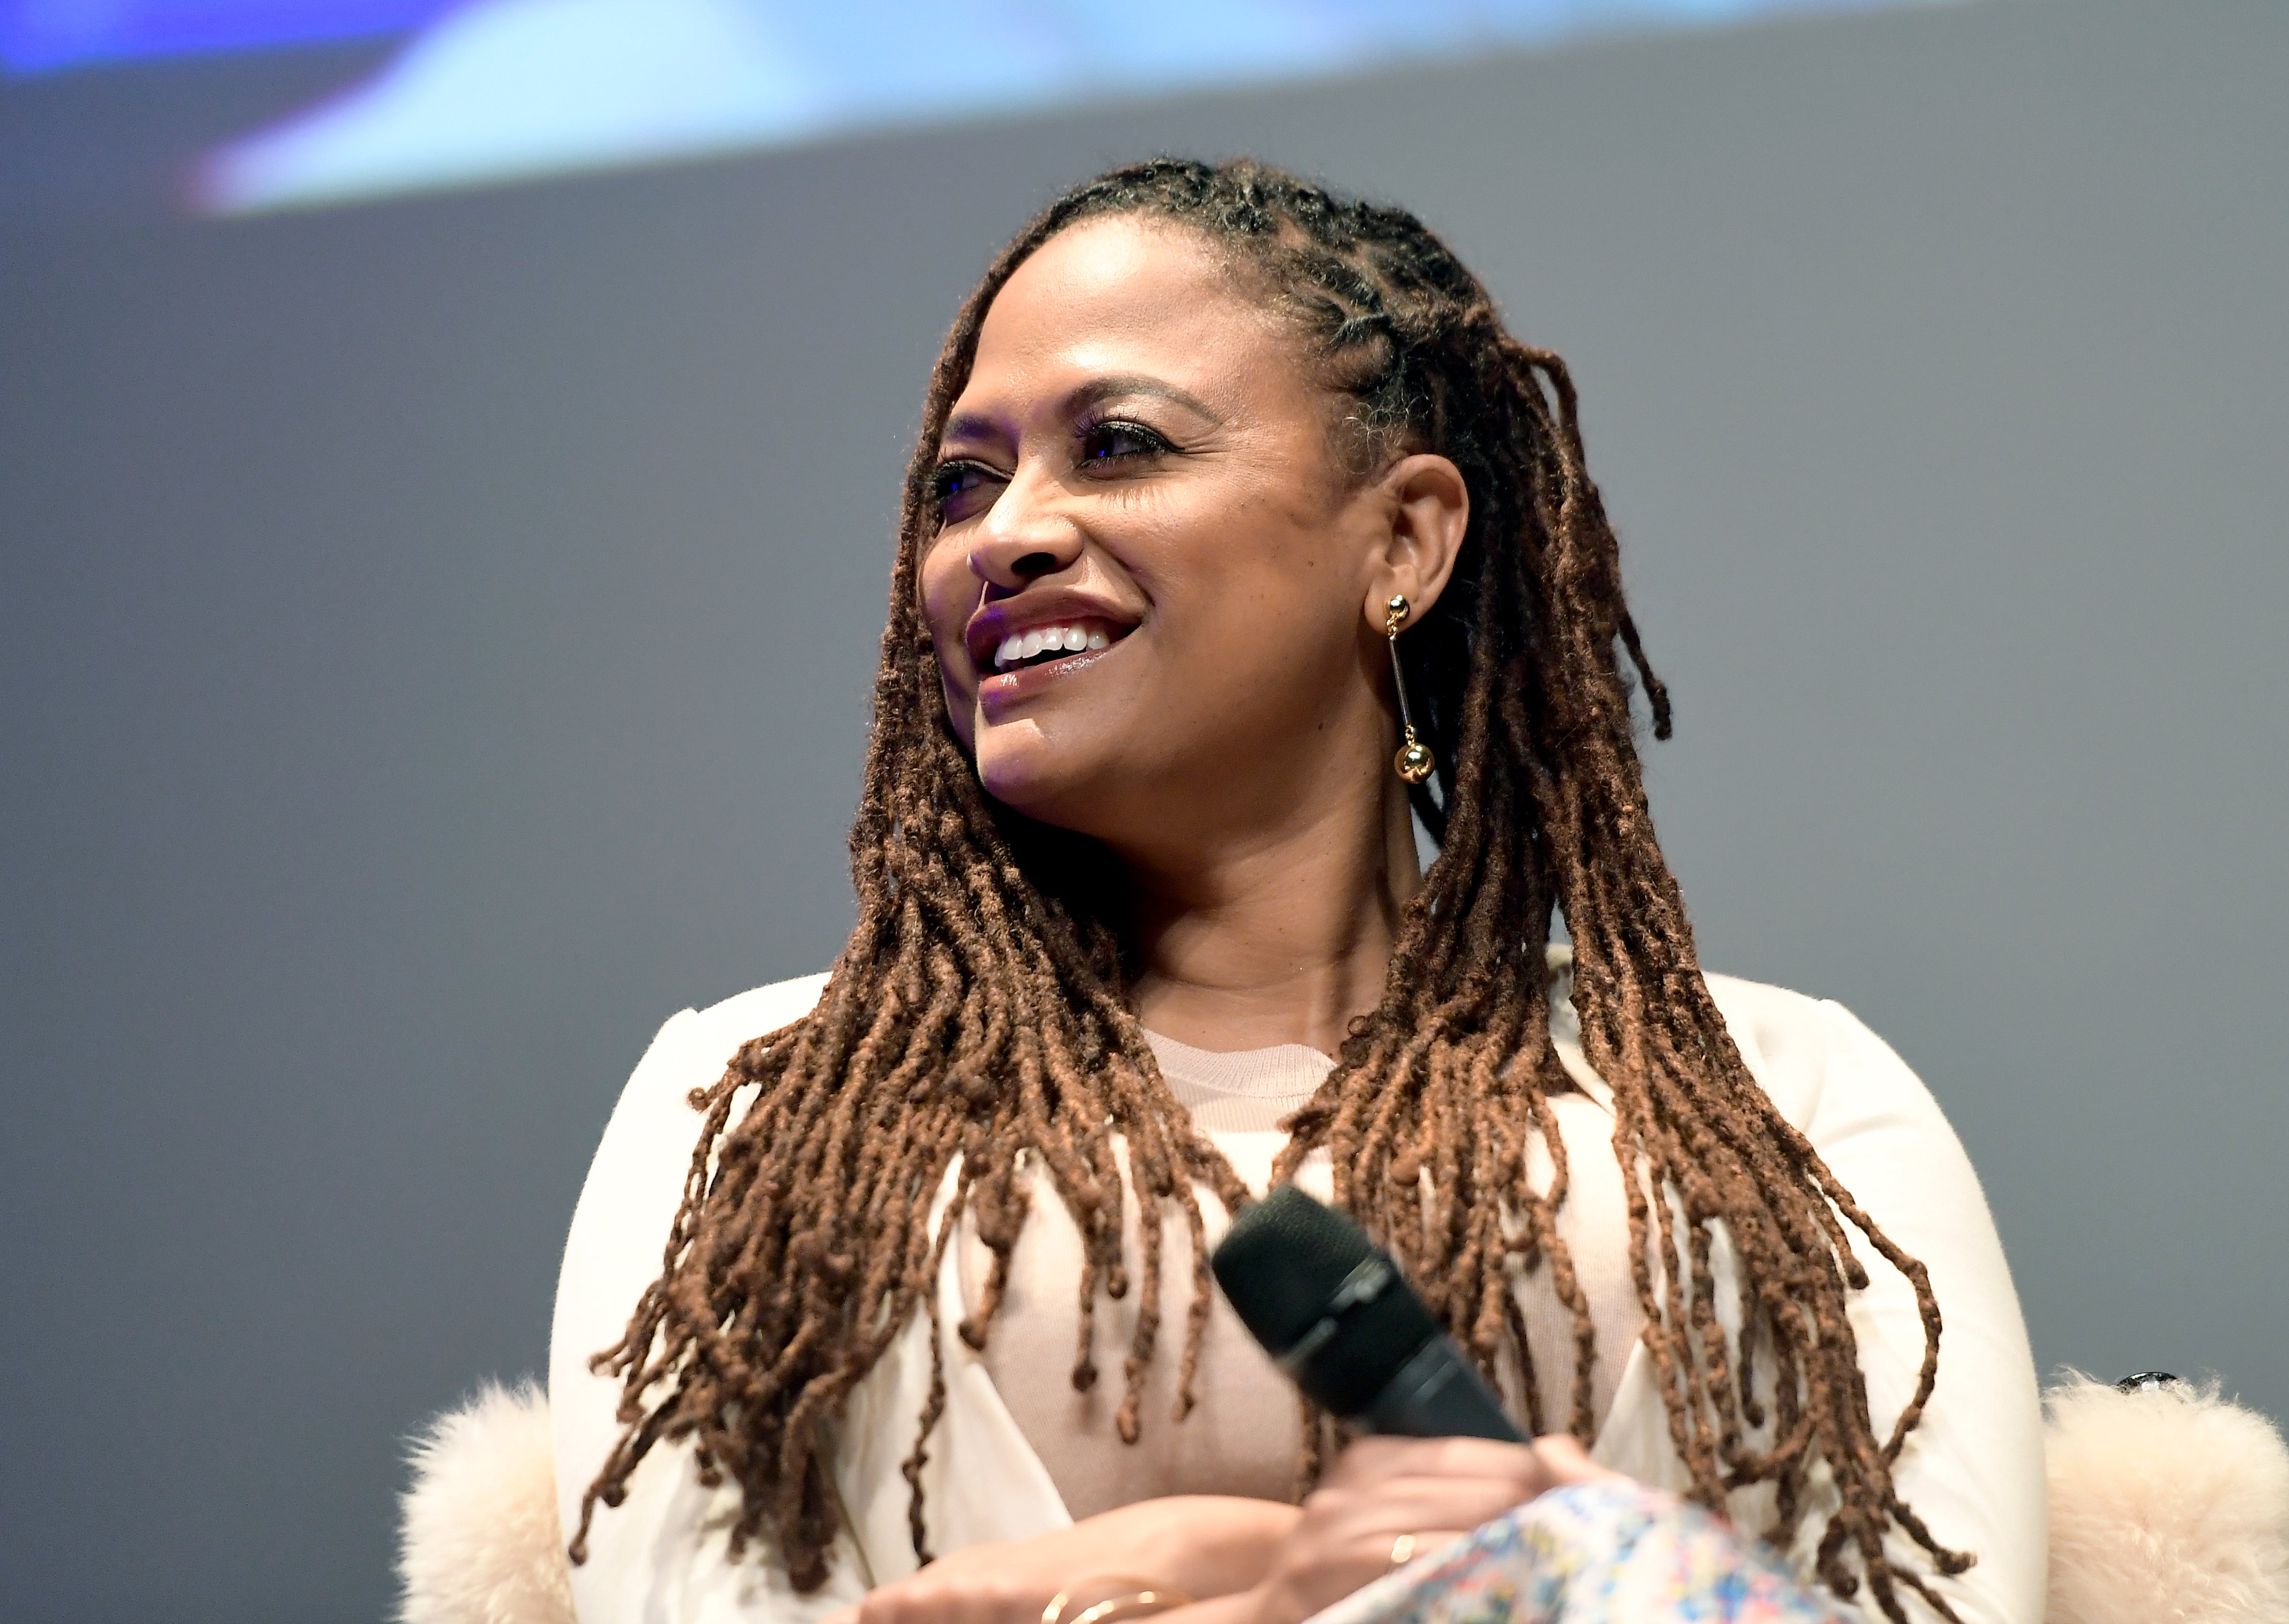 Ava DuVernay On Hiring All-Women Directors: 'We Can And We Want To'
